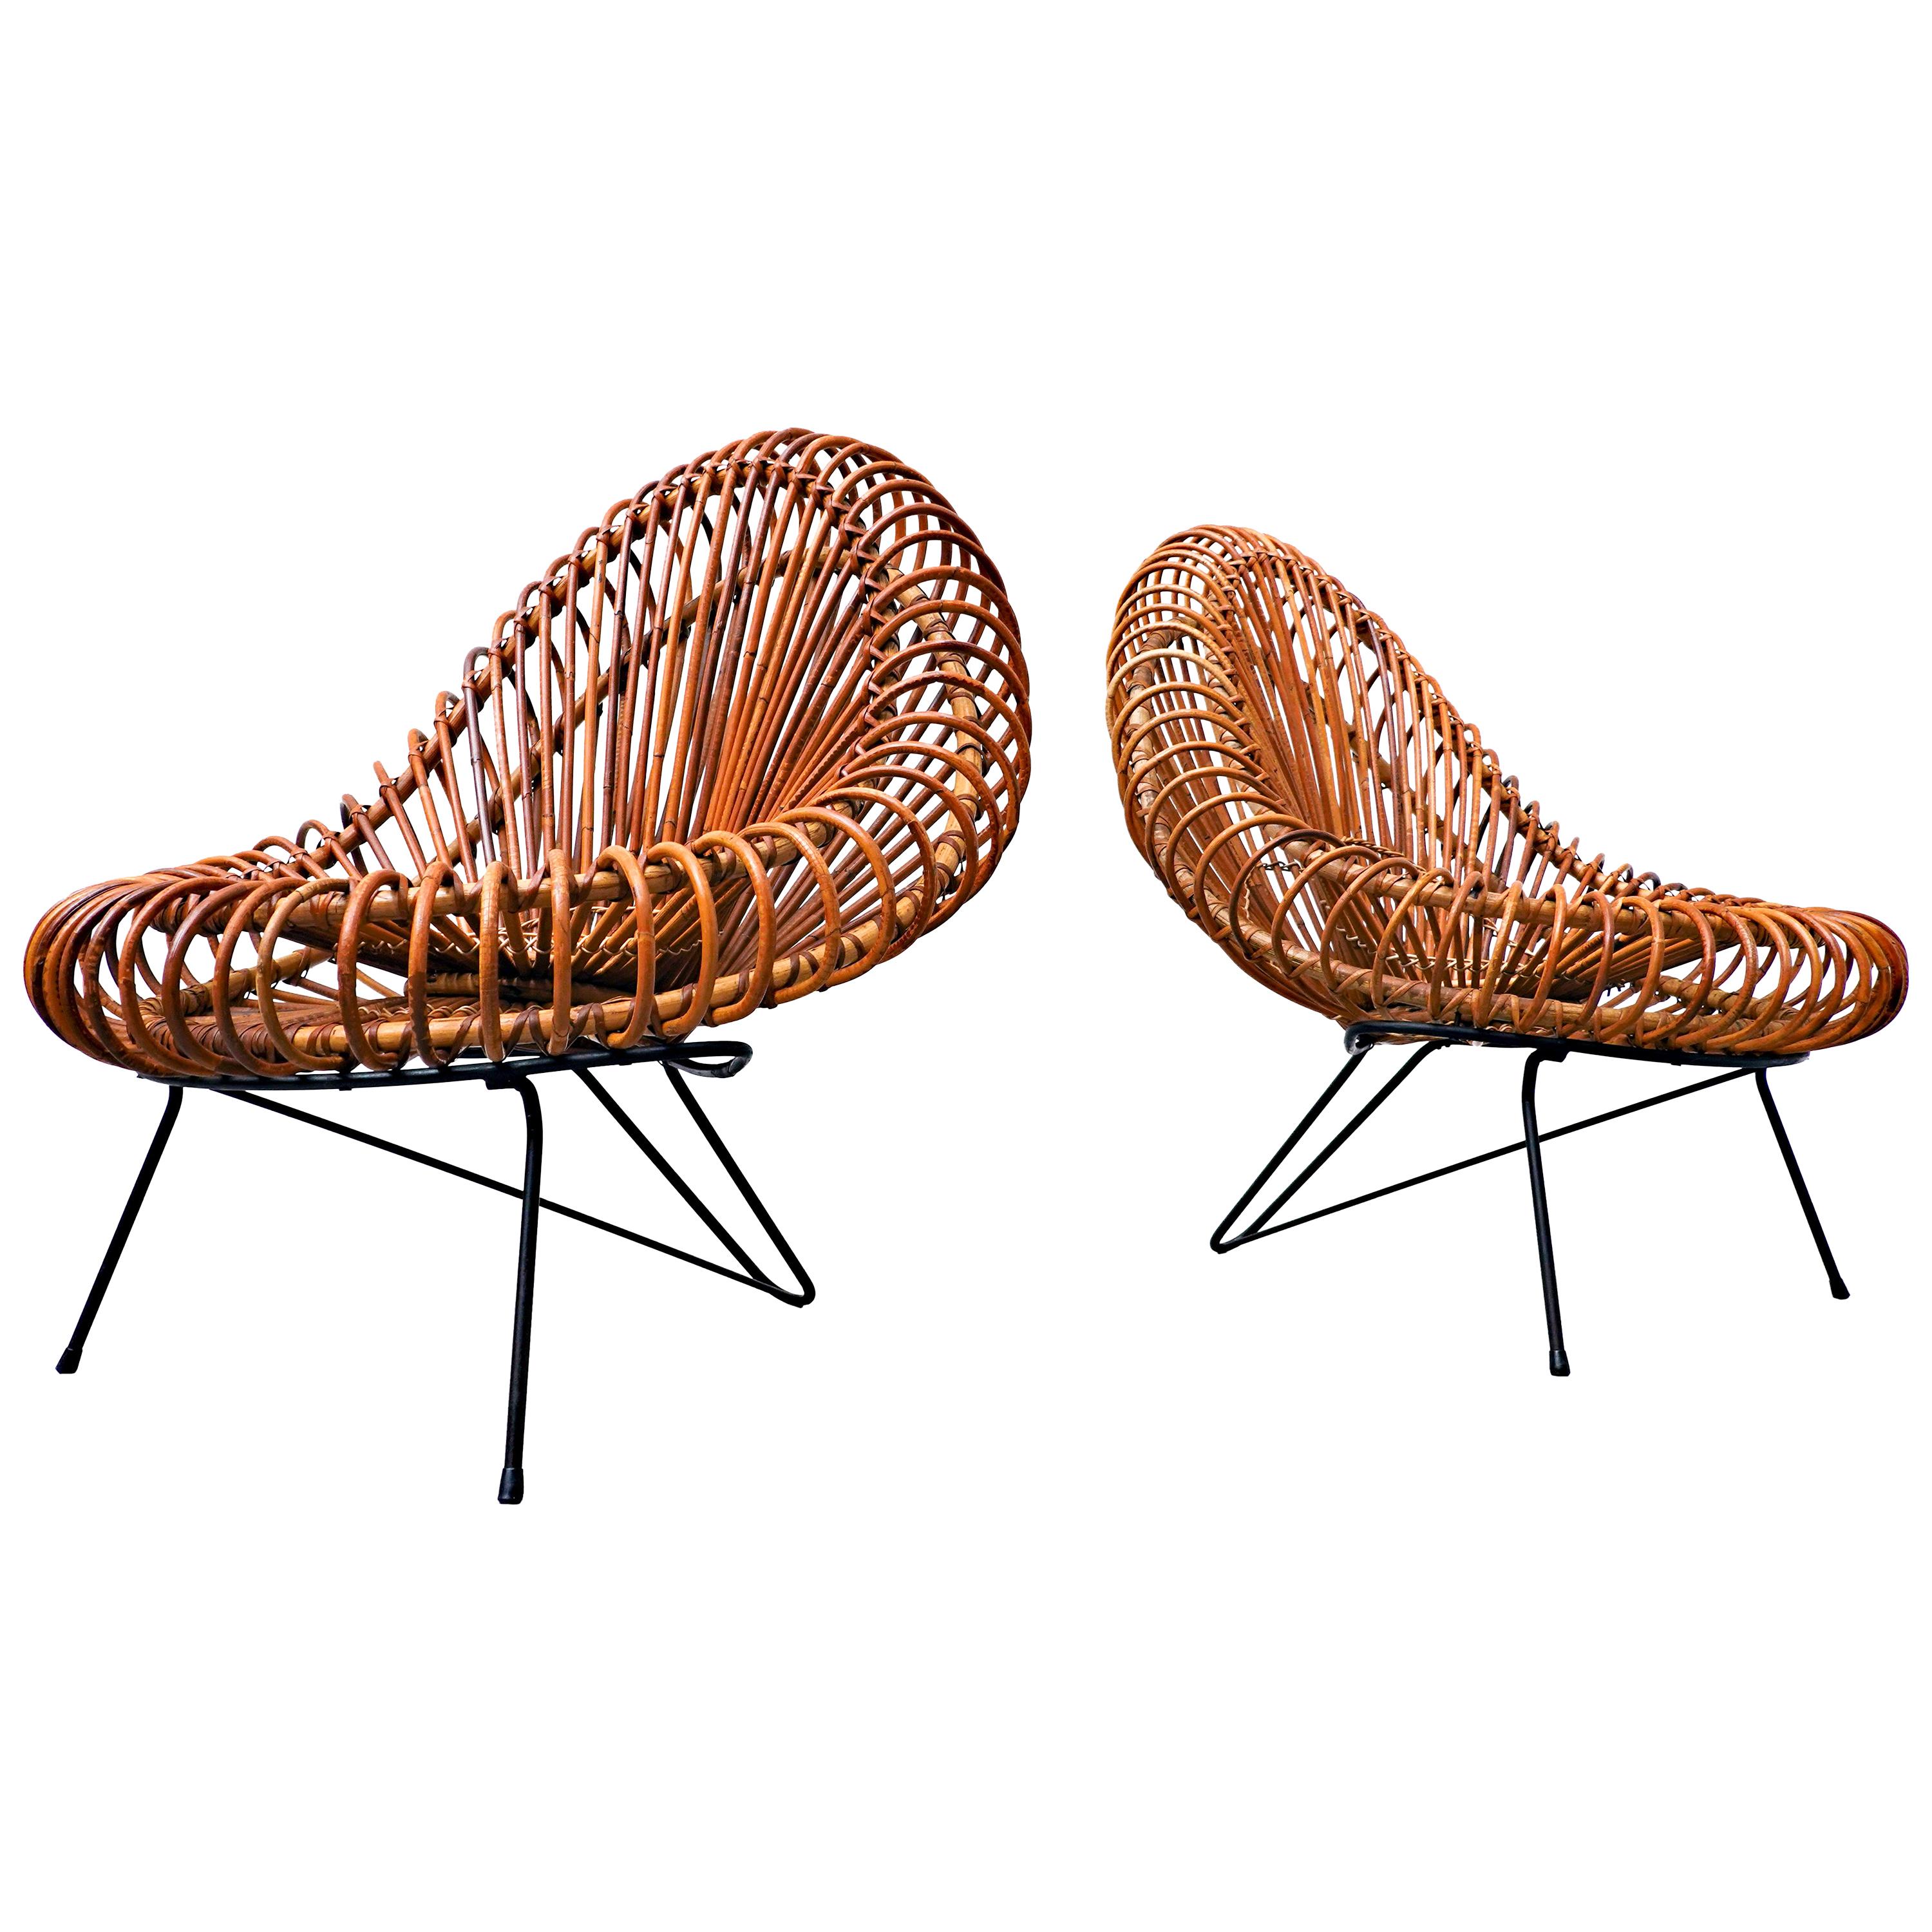 Pair of Mid-Century Chairs by Janine Abraham & Dirk Jan Rol,  Rougier, 1950s